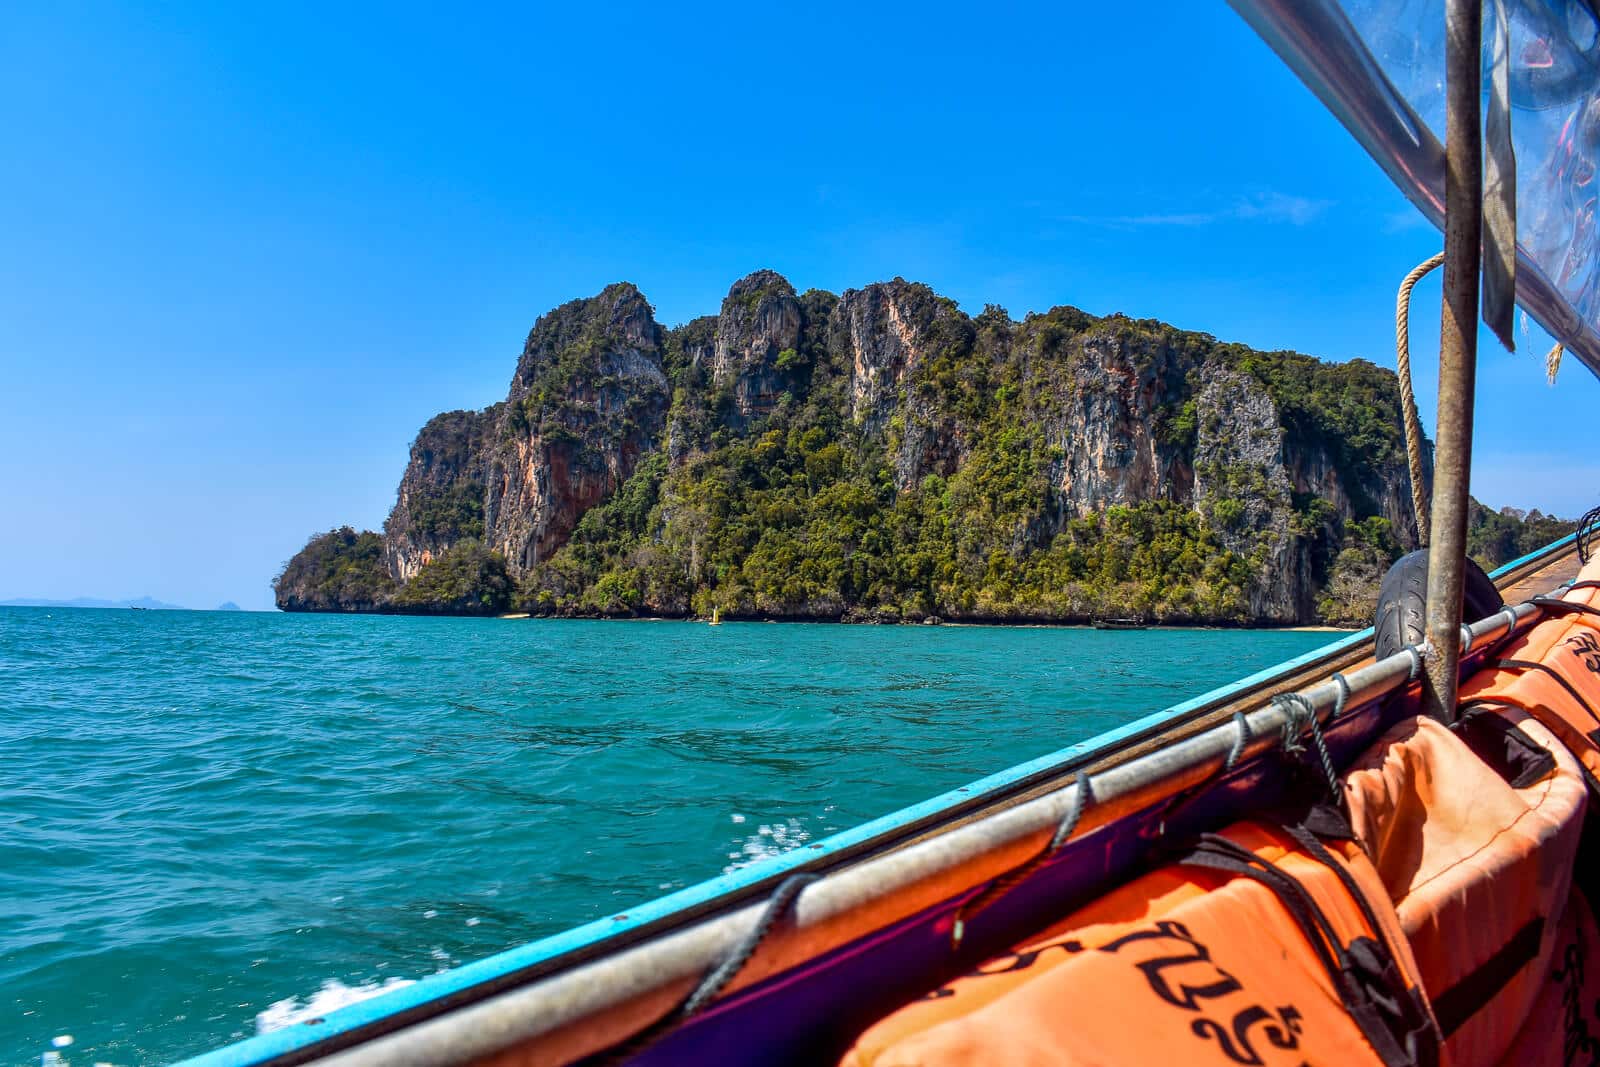 How to get from Krabi to Railay beach